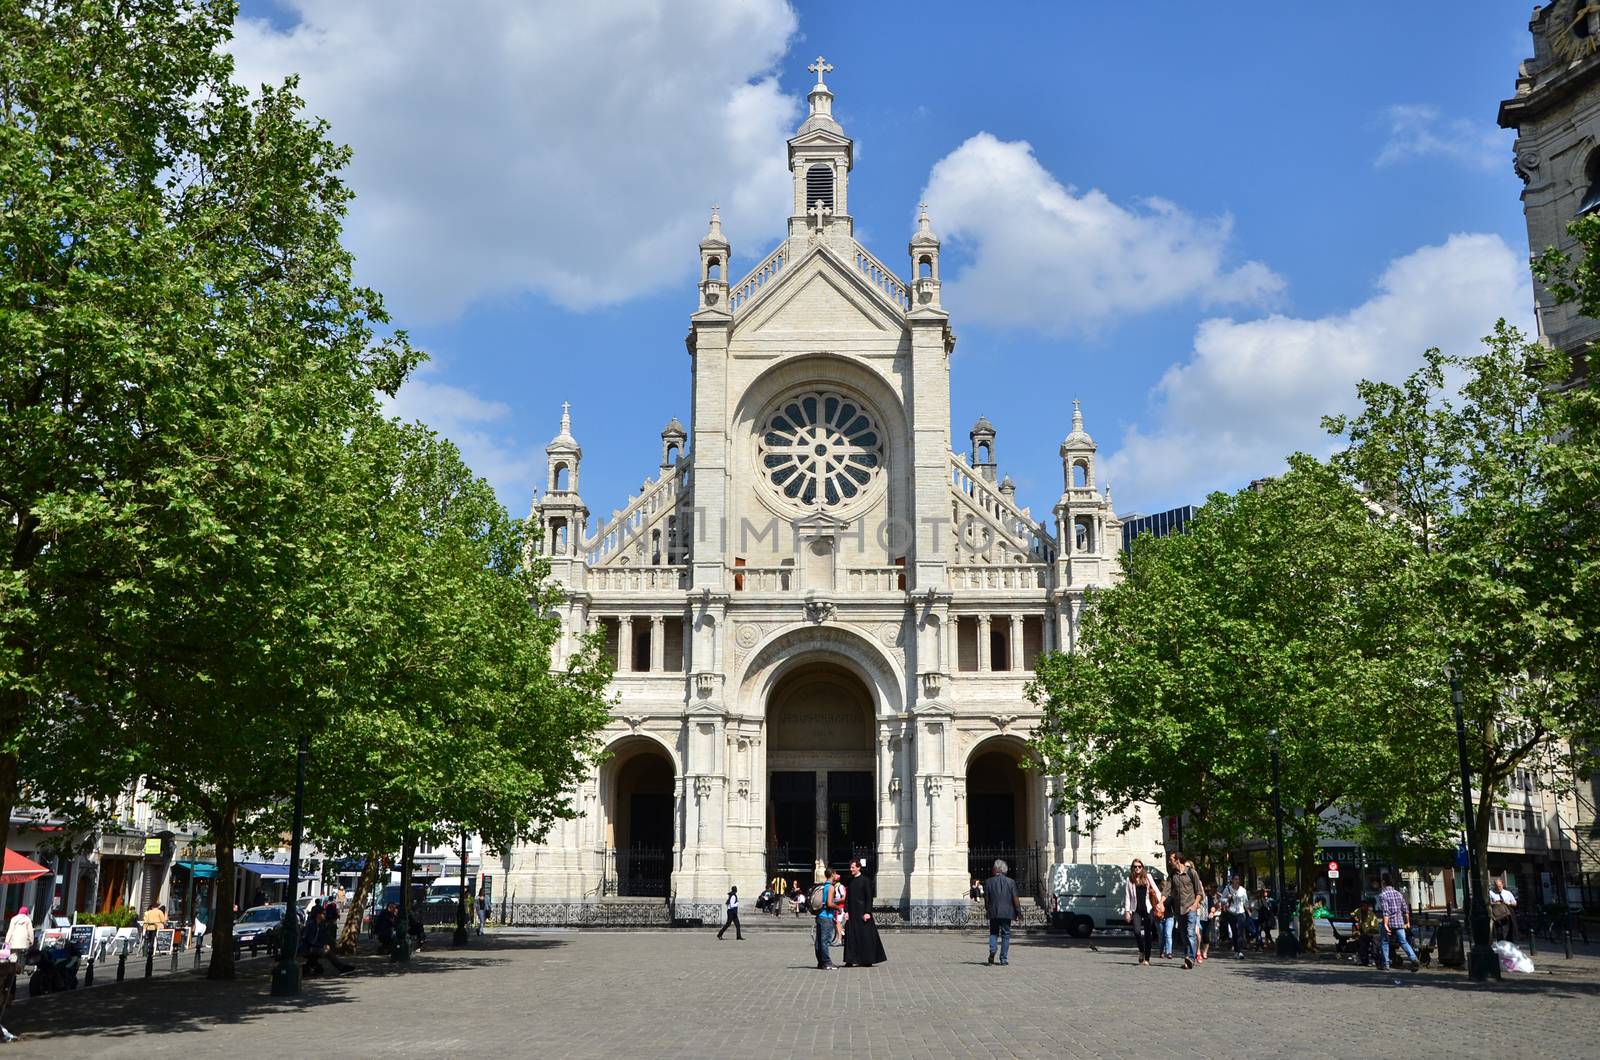 Brussels, Belgium - May 12, 2015: Peoples visit saint catherine church on May 12, 2015 in the center of Brussels. The church, inspired by St. Eustache in Paris.